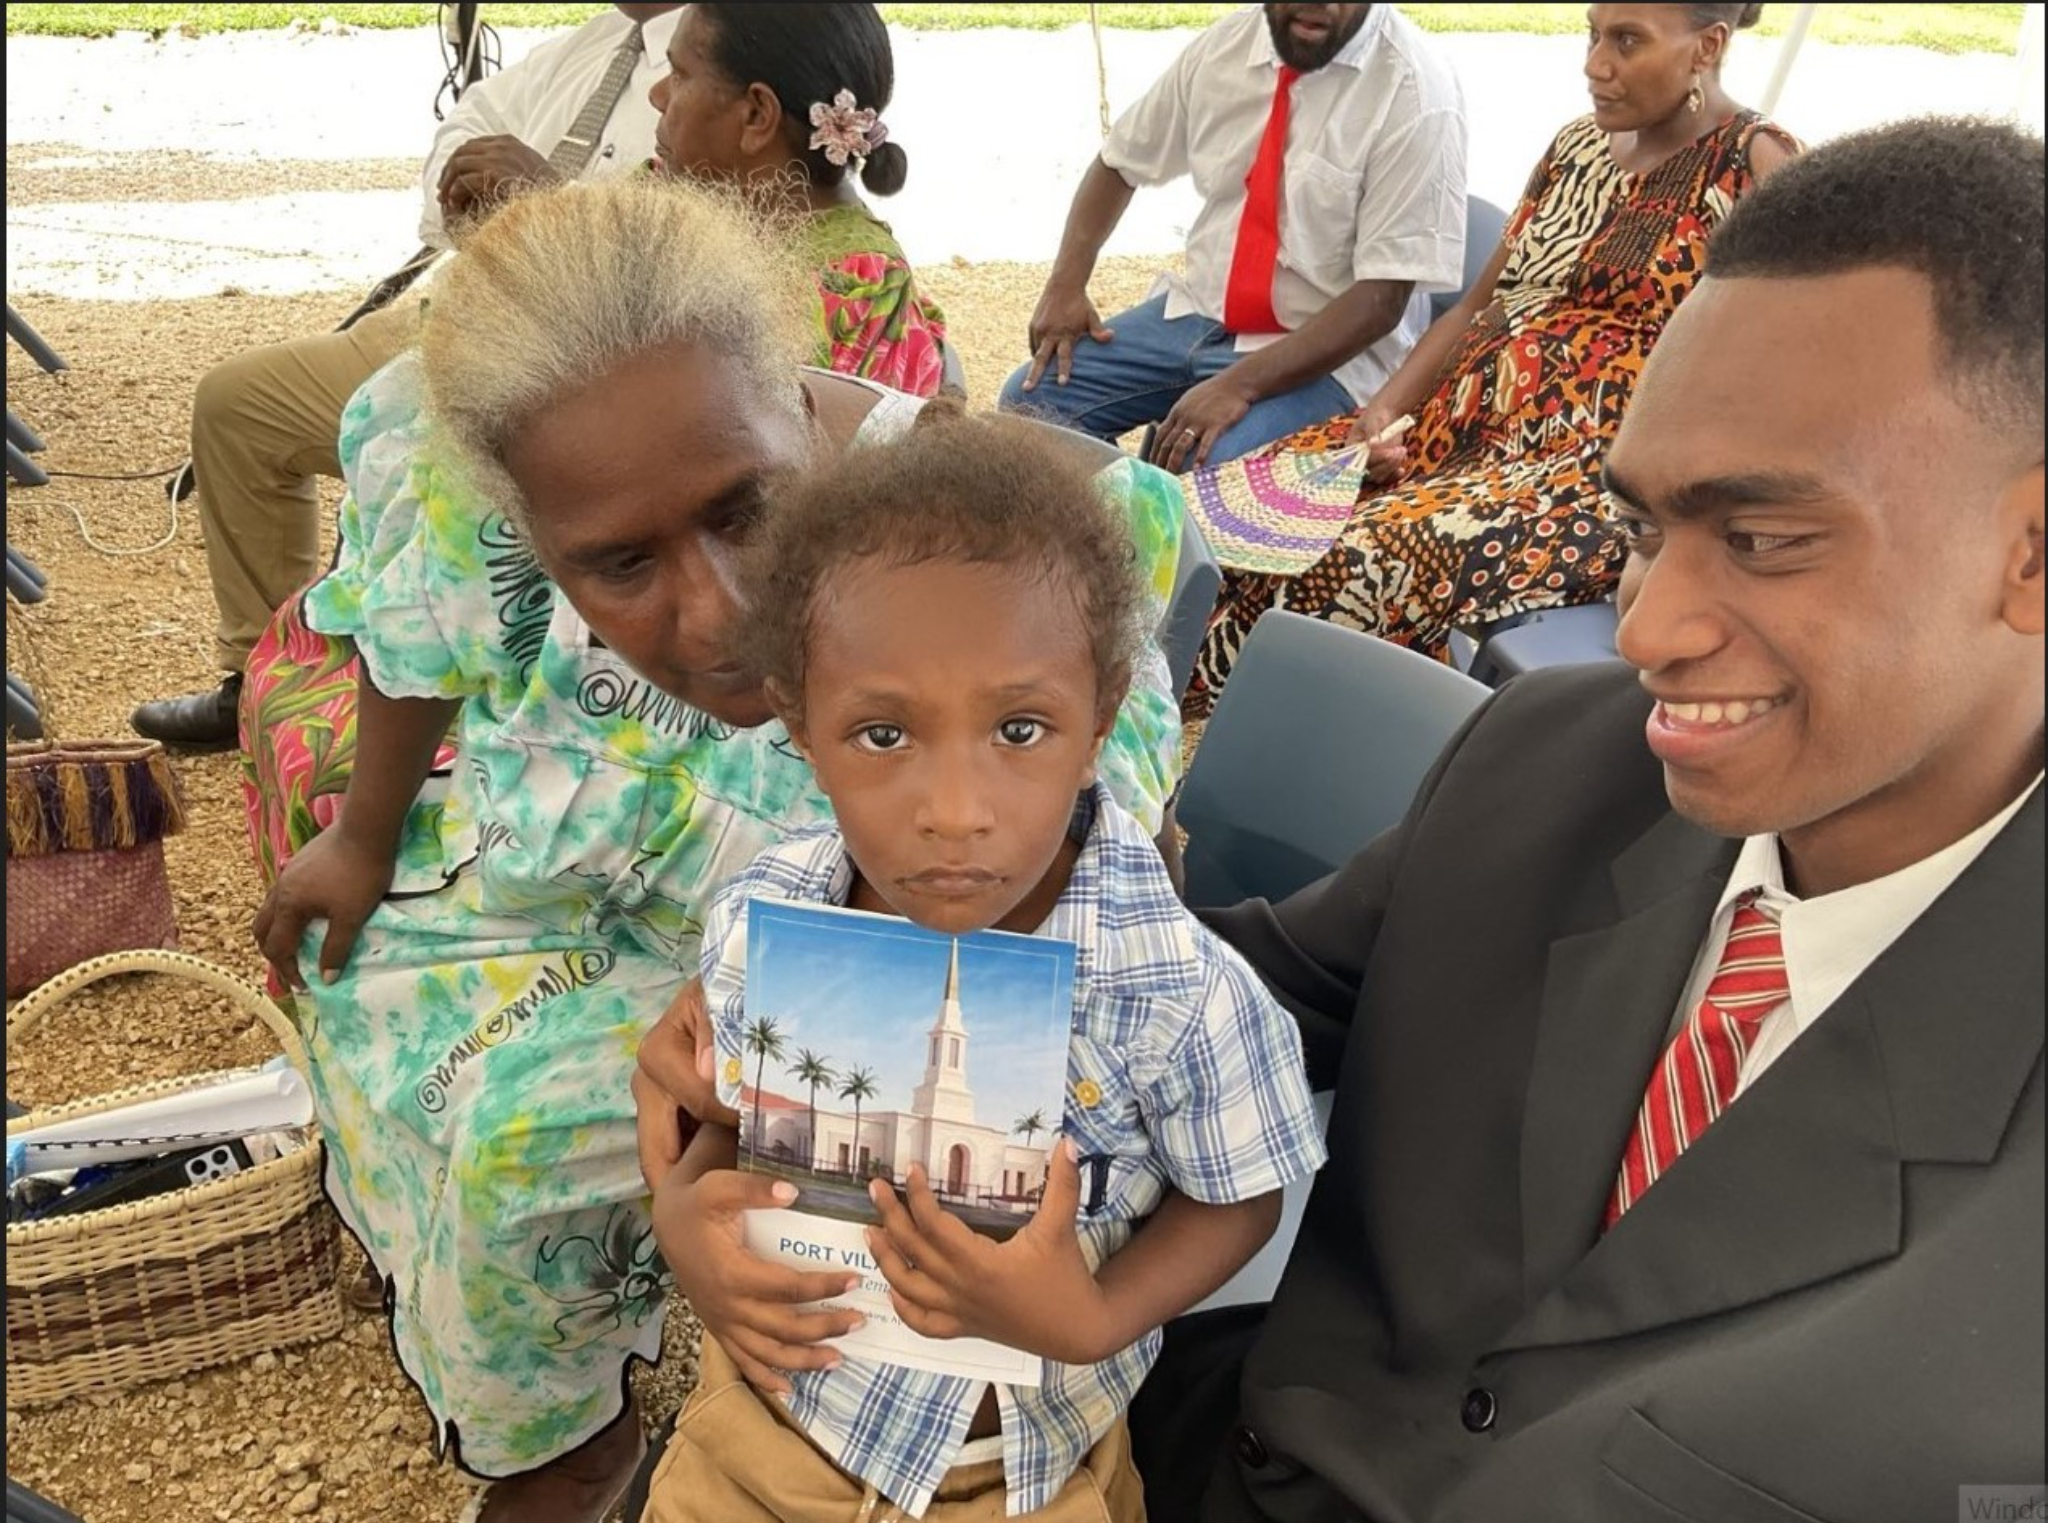 A boy holding a paper program that shows a rendering of the Port Vila temple, with several other people in Sunday best seated around him.